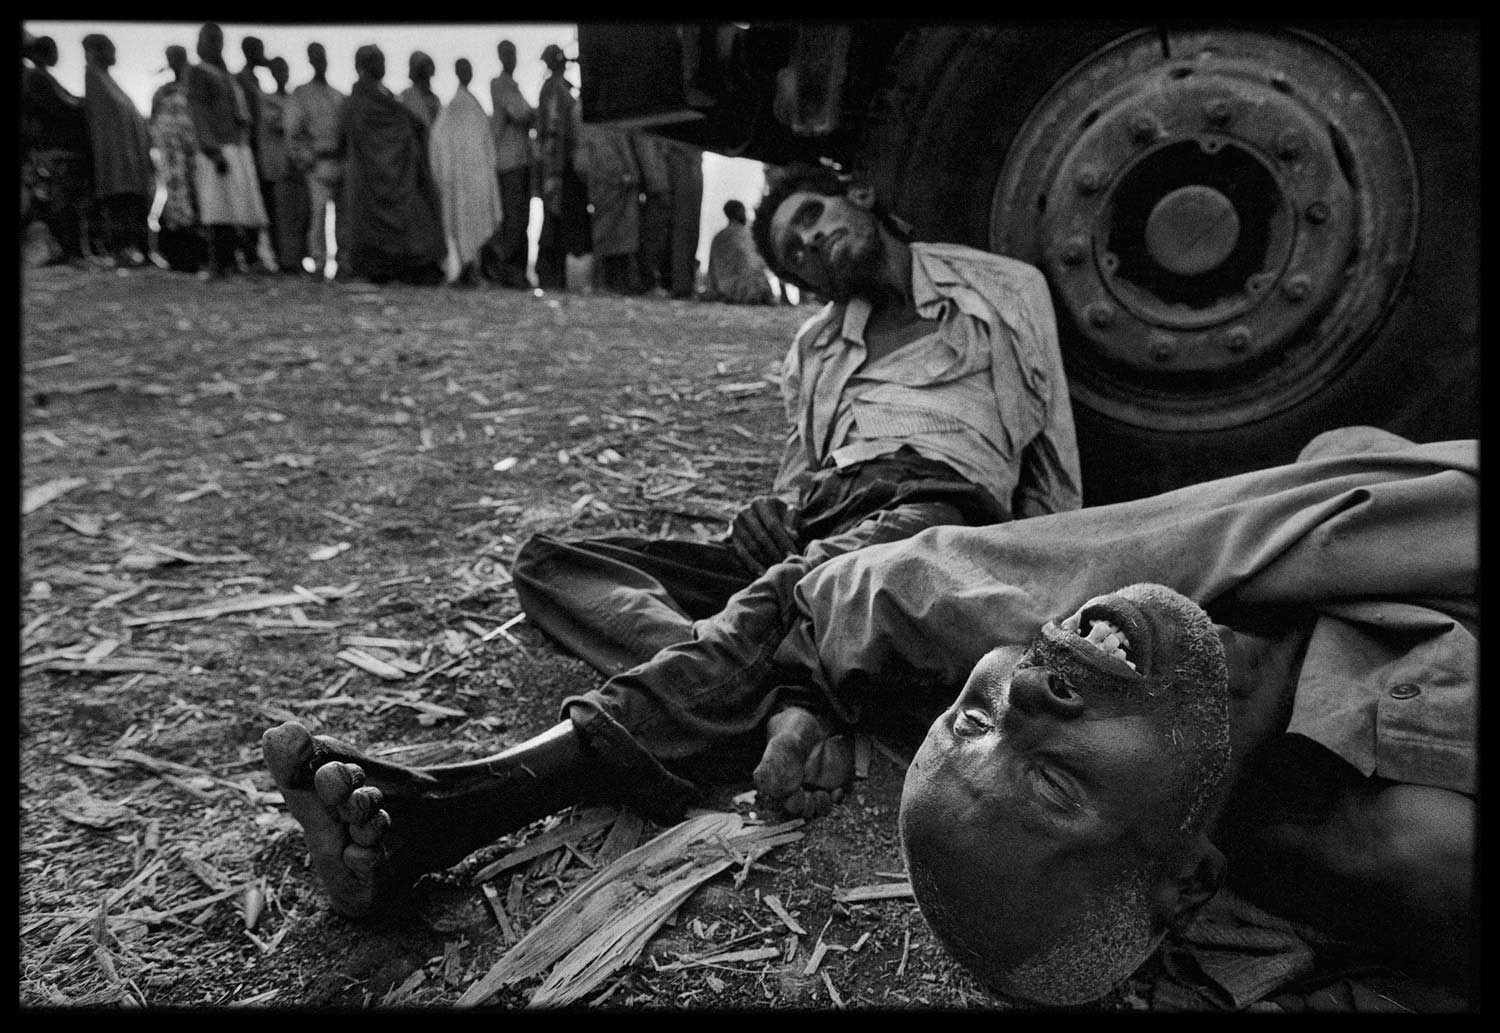 Refugees lined up to receive medical assistance in Zaire. Some died while they waited, Zaire, 1994.